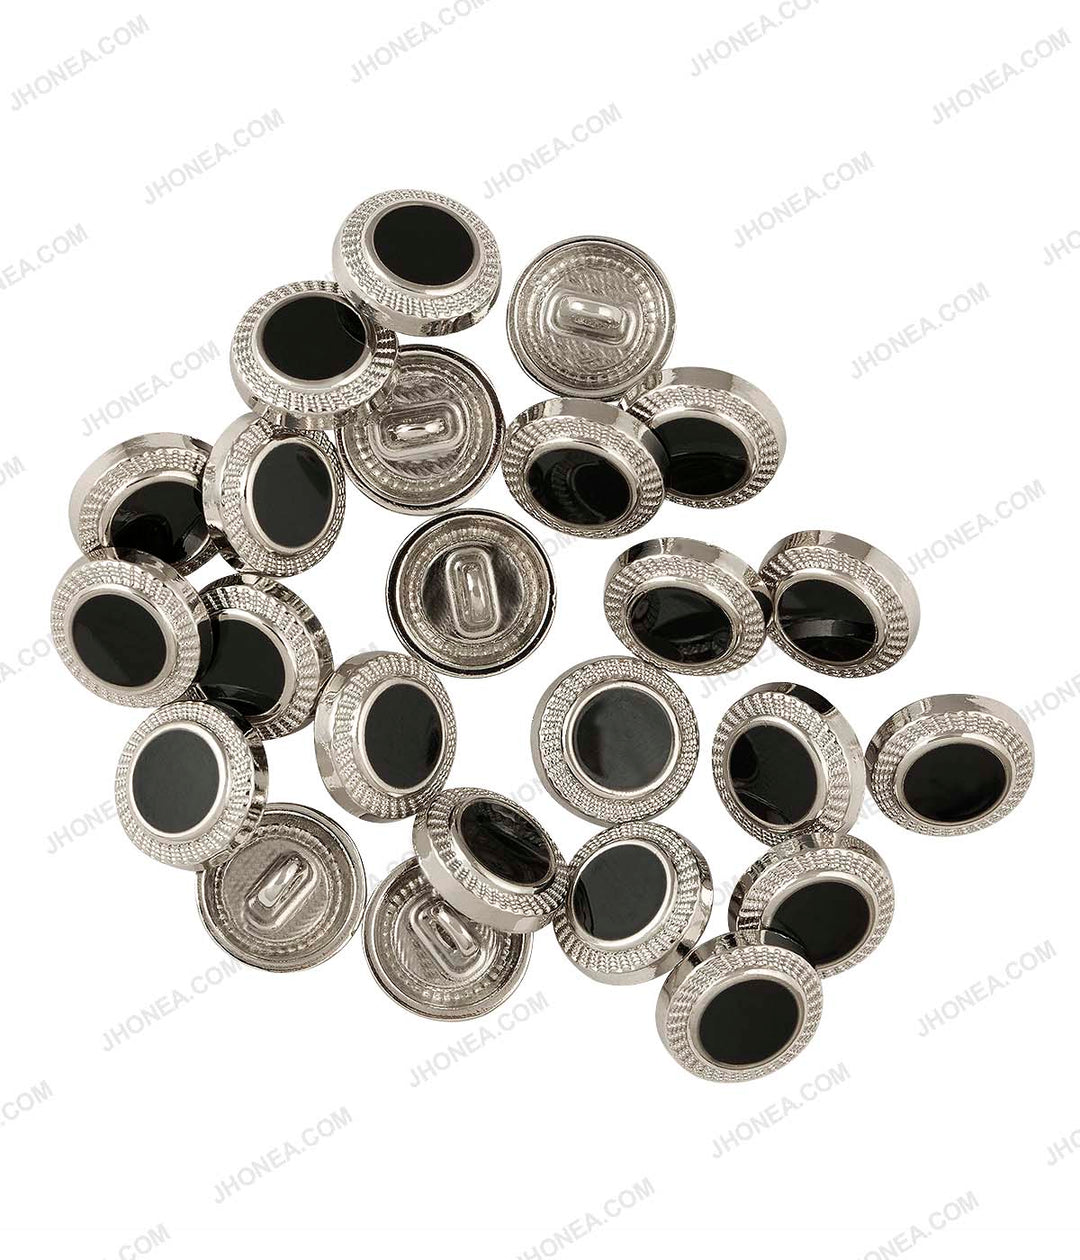 Shiny Silver Engraved lines Rim Border with Black Enamel Shirt Buttons